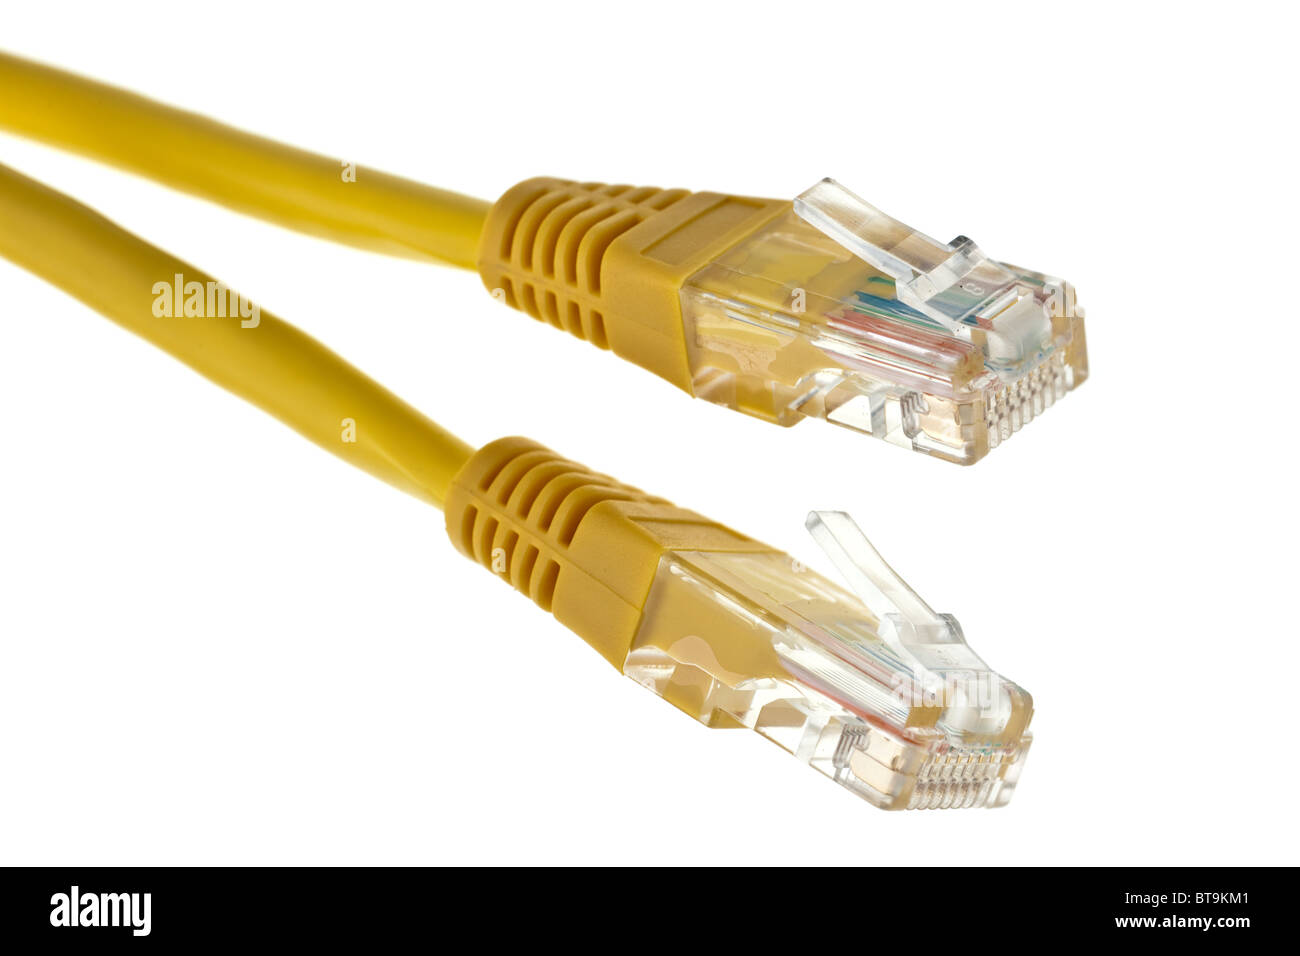 Yellow RJ45 Ethernet lan network cable lead and two connectors Stock Photo